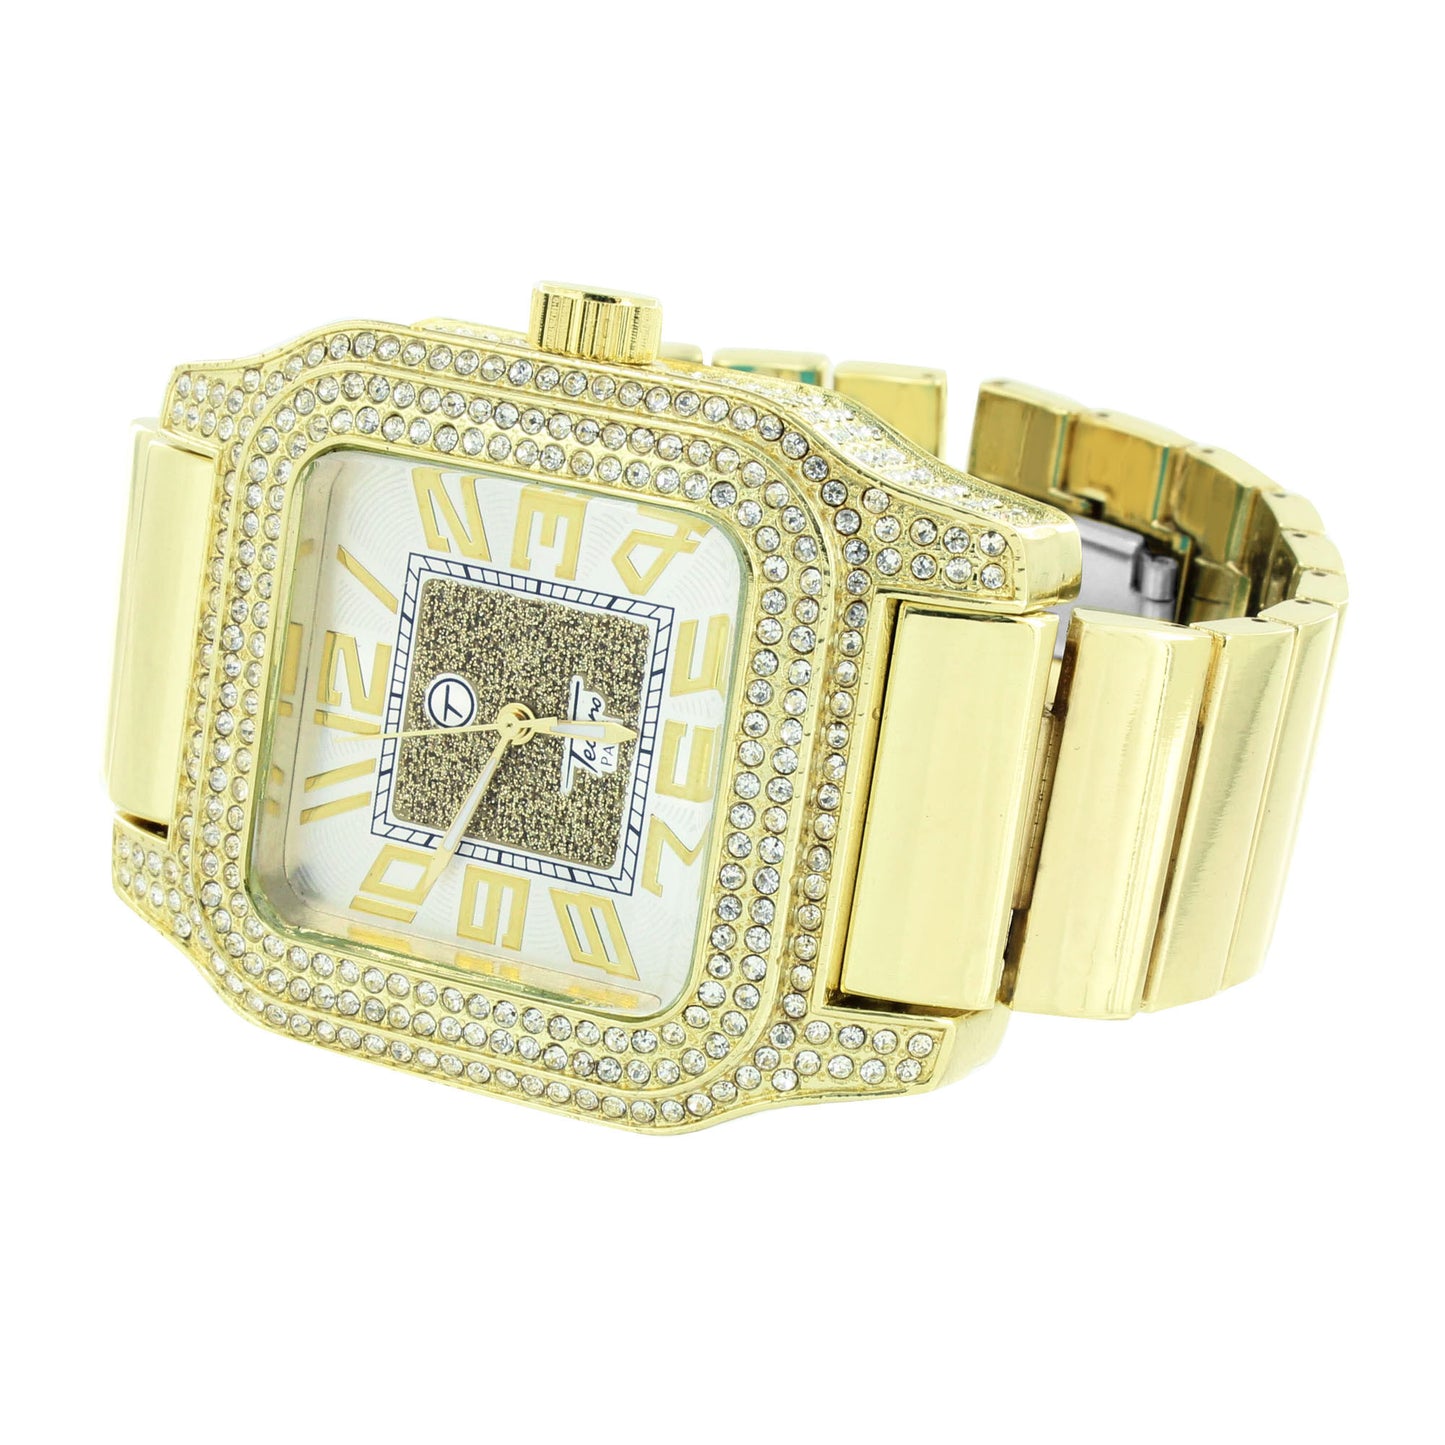 Silver Tone Dial Watch Stretch Band Square Face